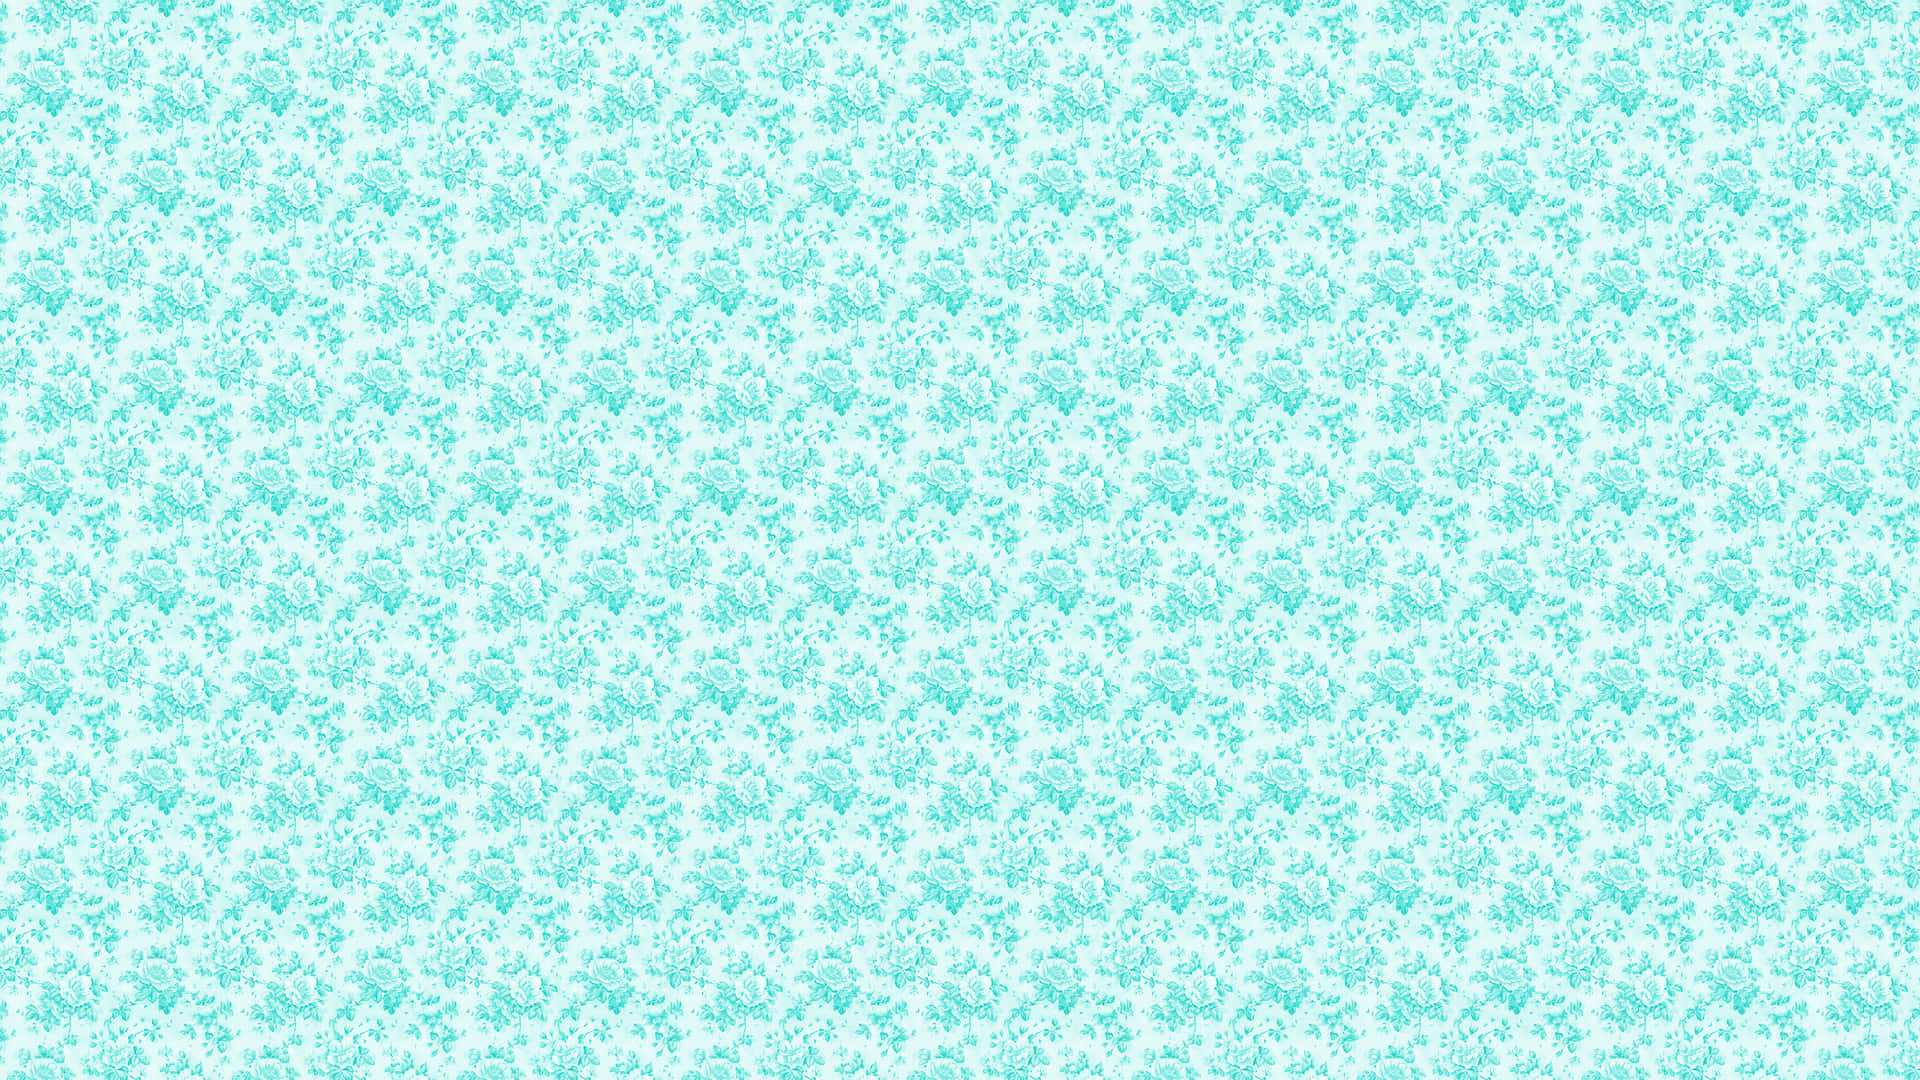 A Blue And White Floral Pattern